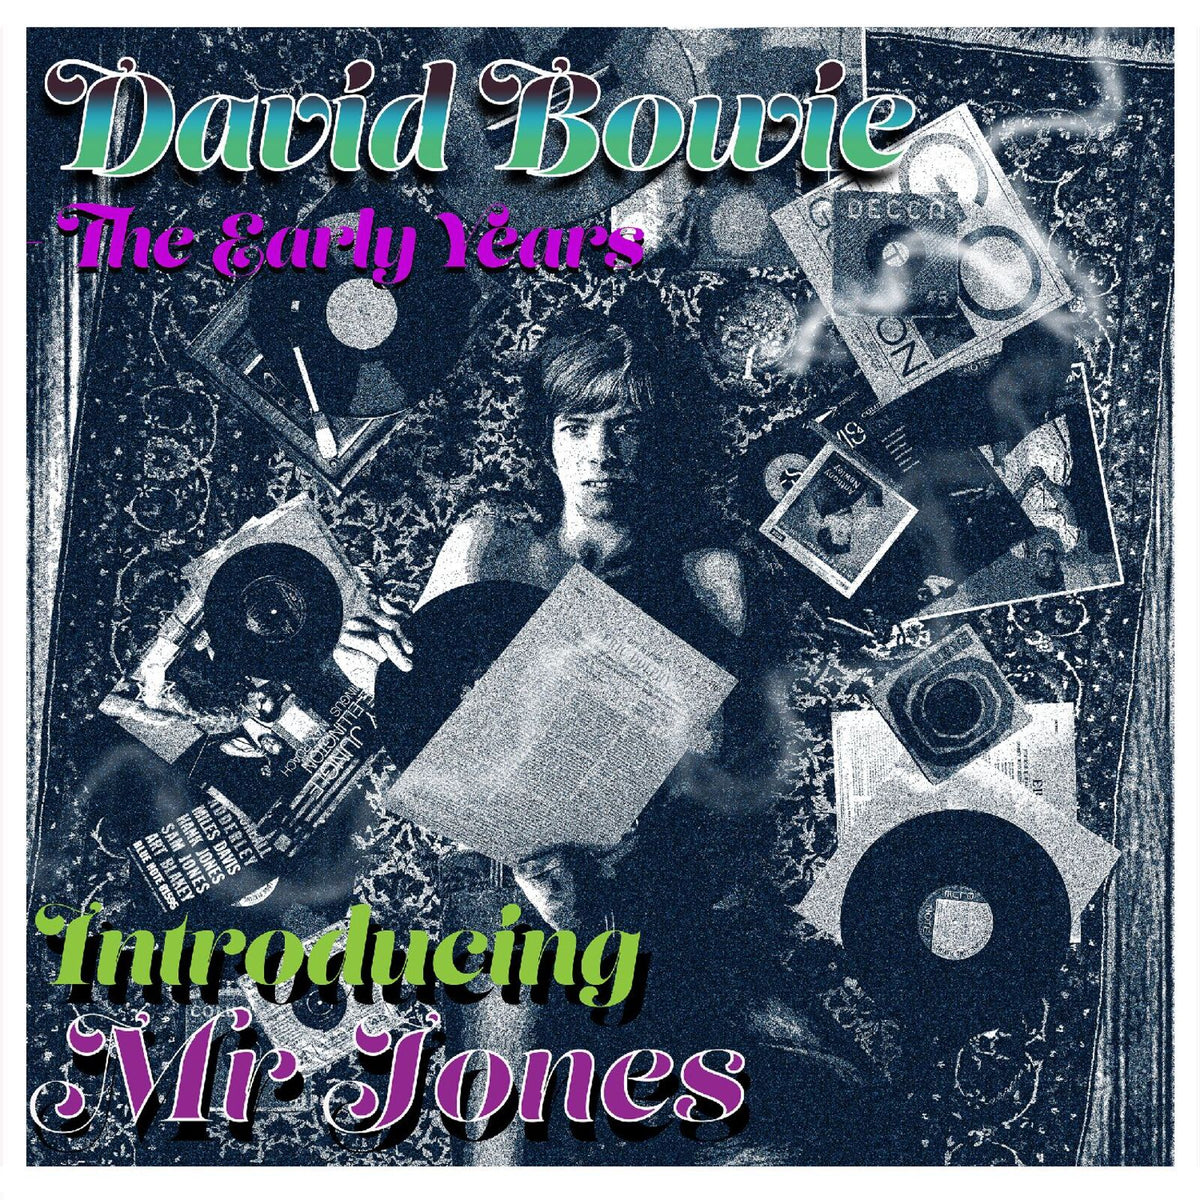 David Bowie - Introducing Mr Jones (The Early Years)